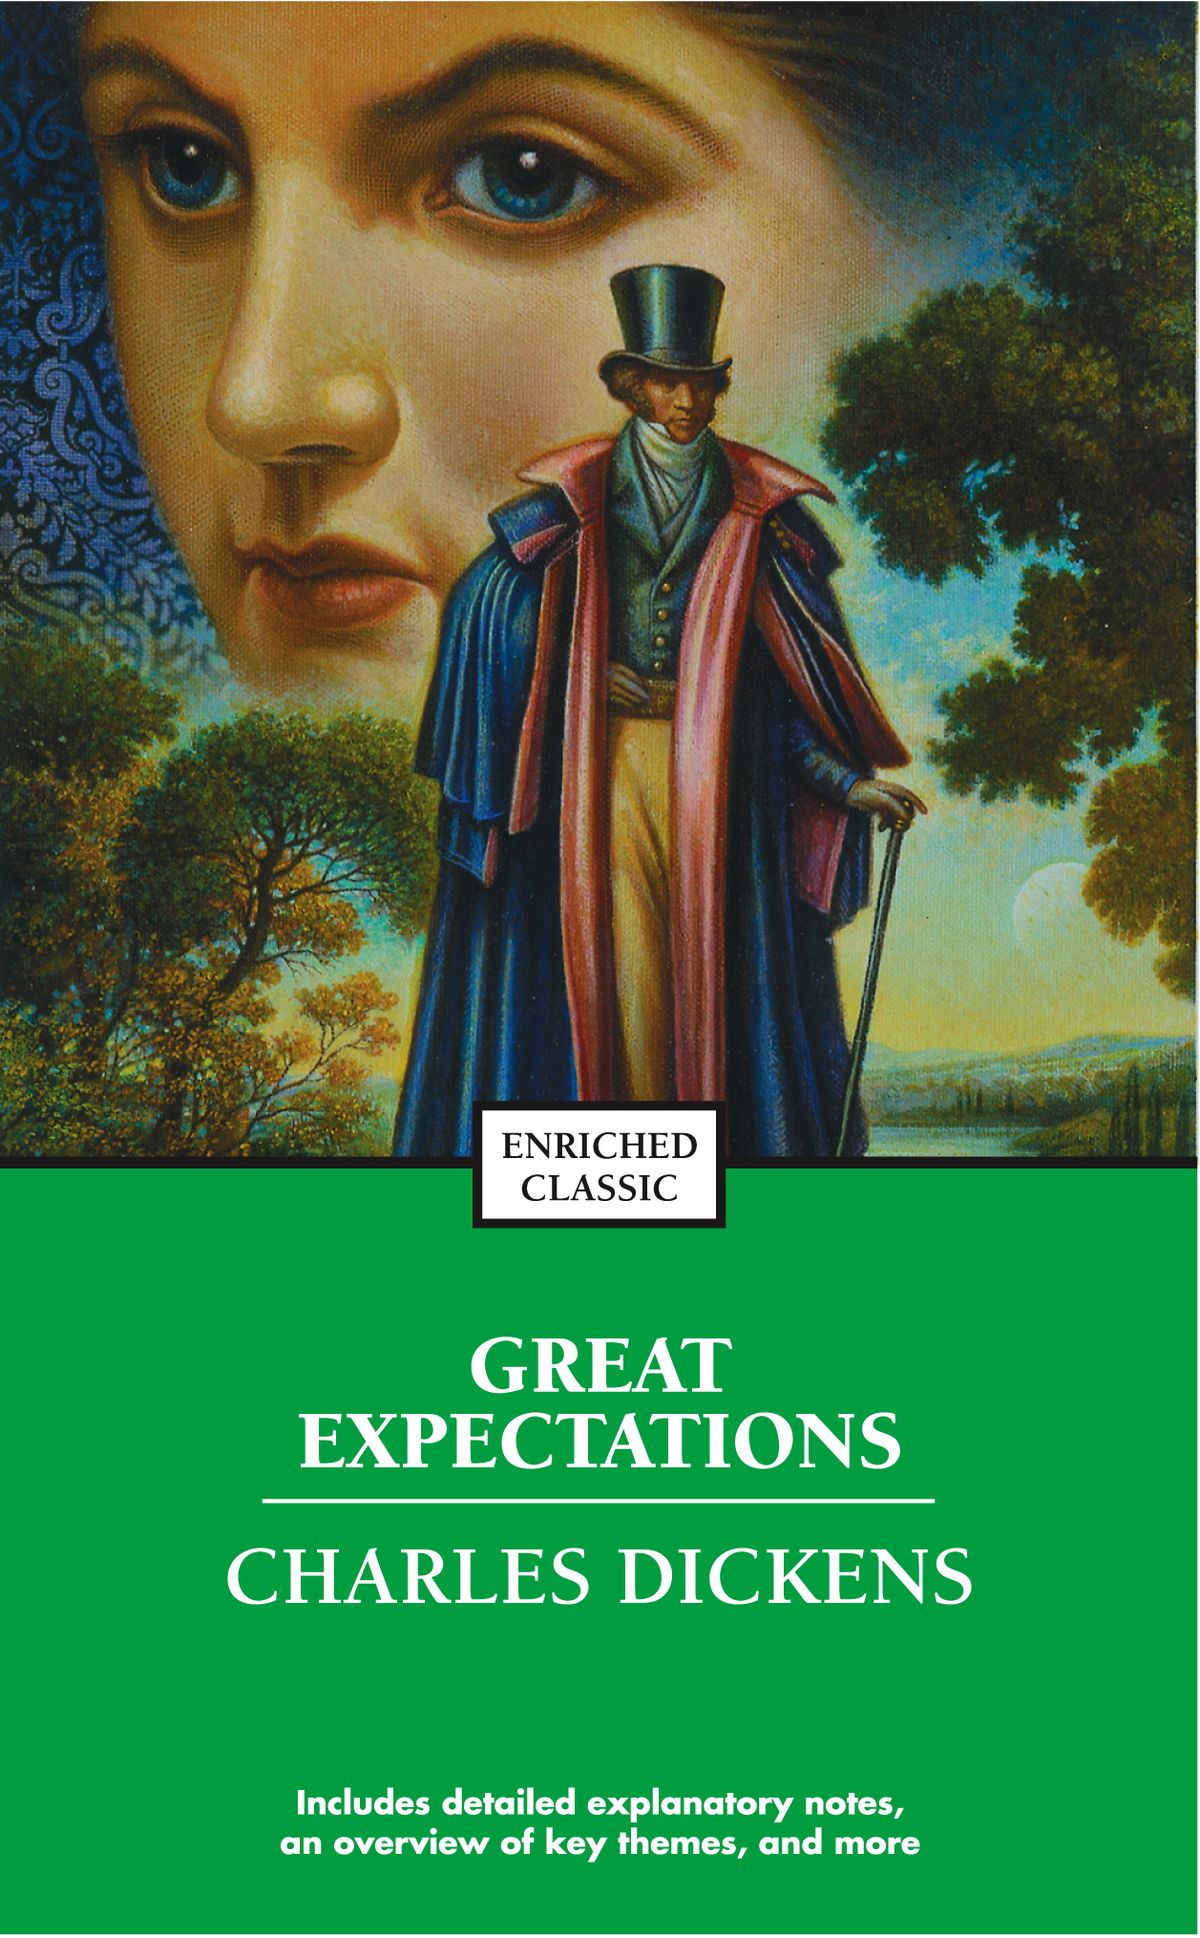 A Night of Charles Dickens "Great Expectations"